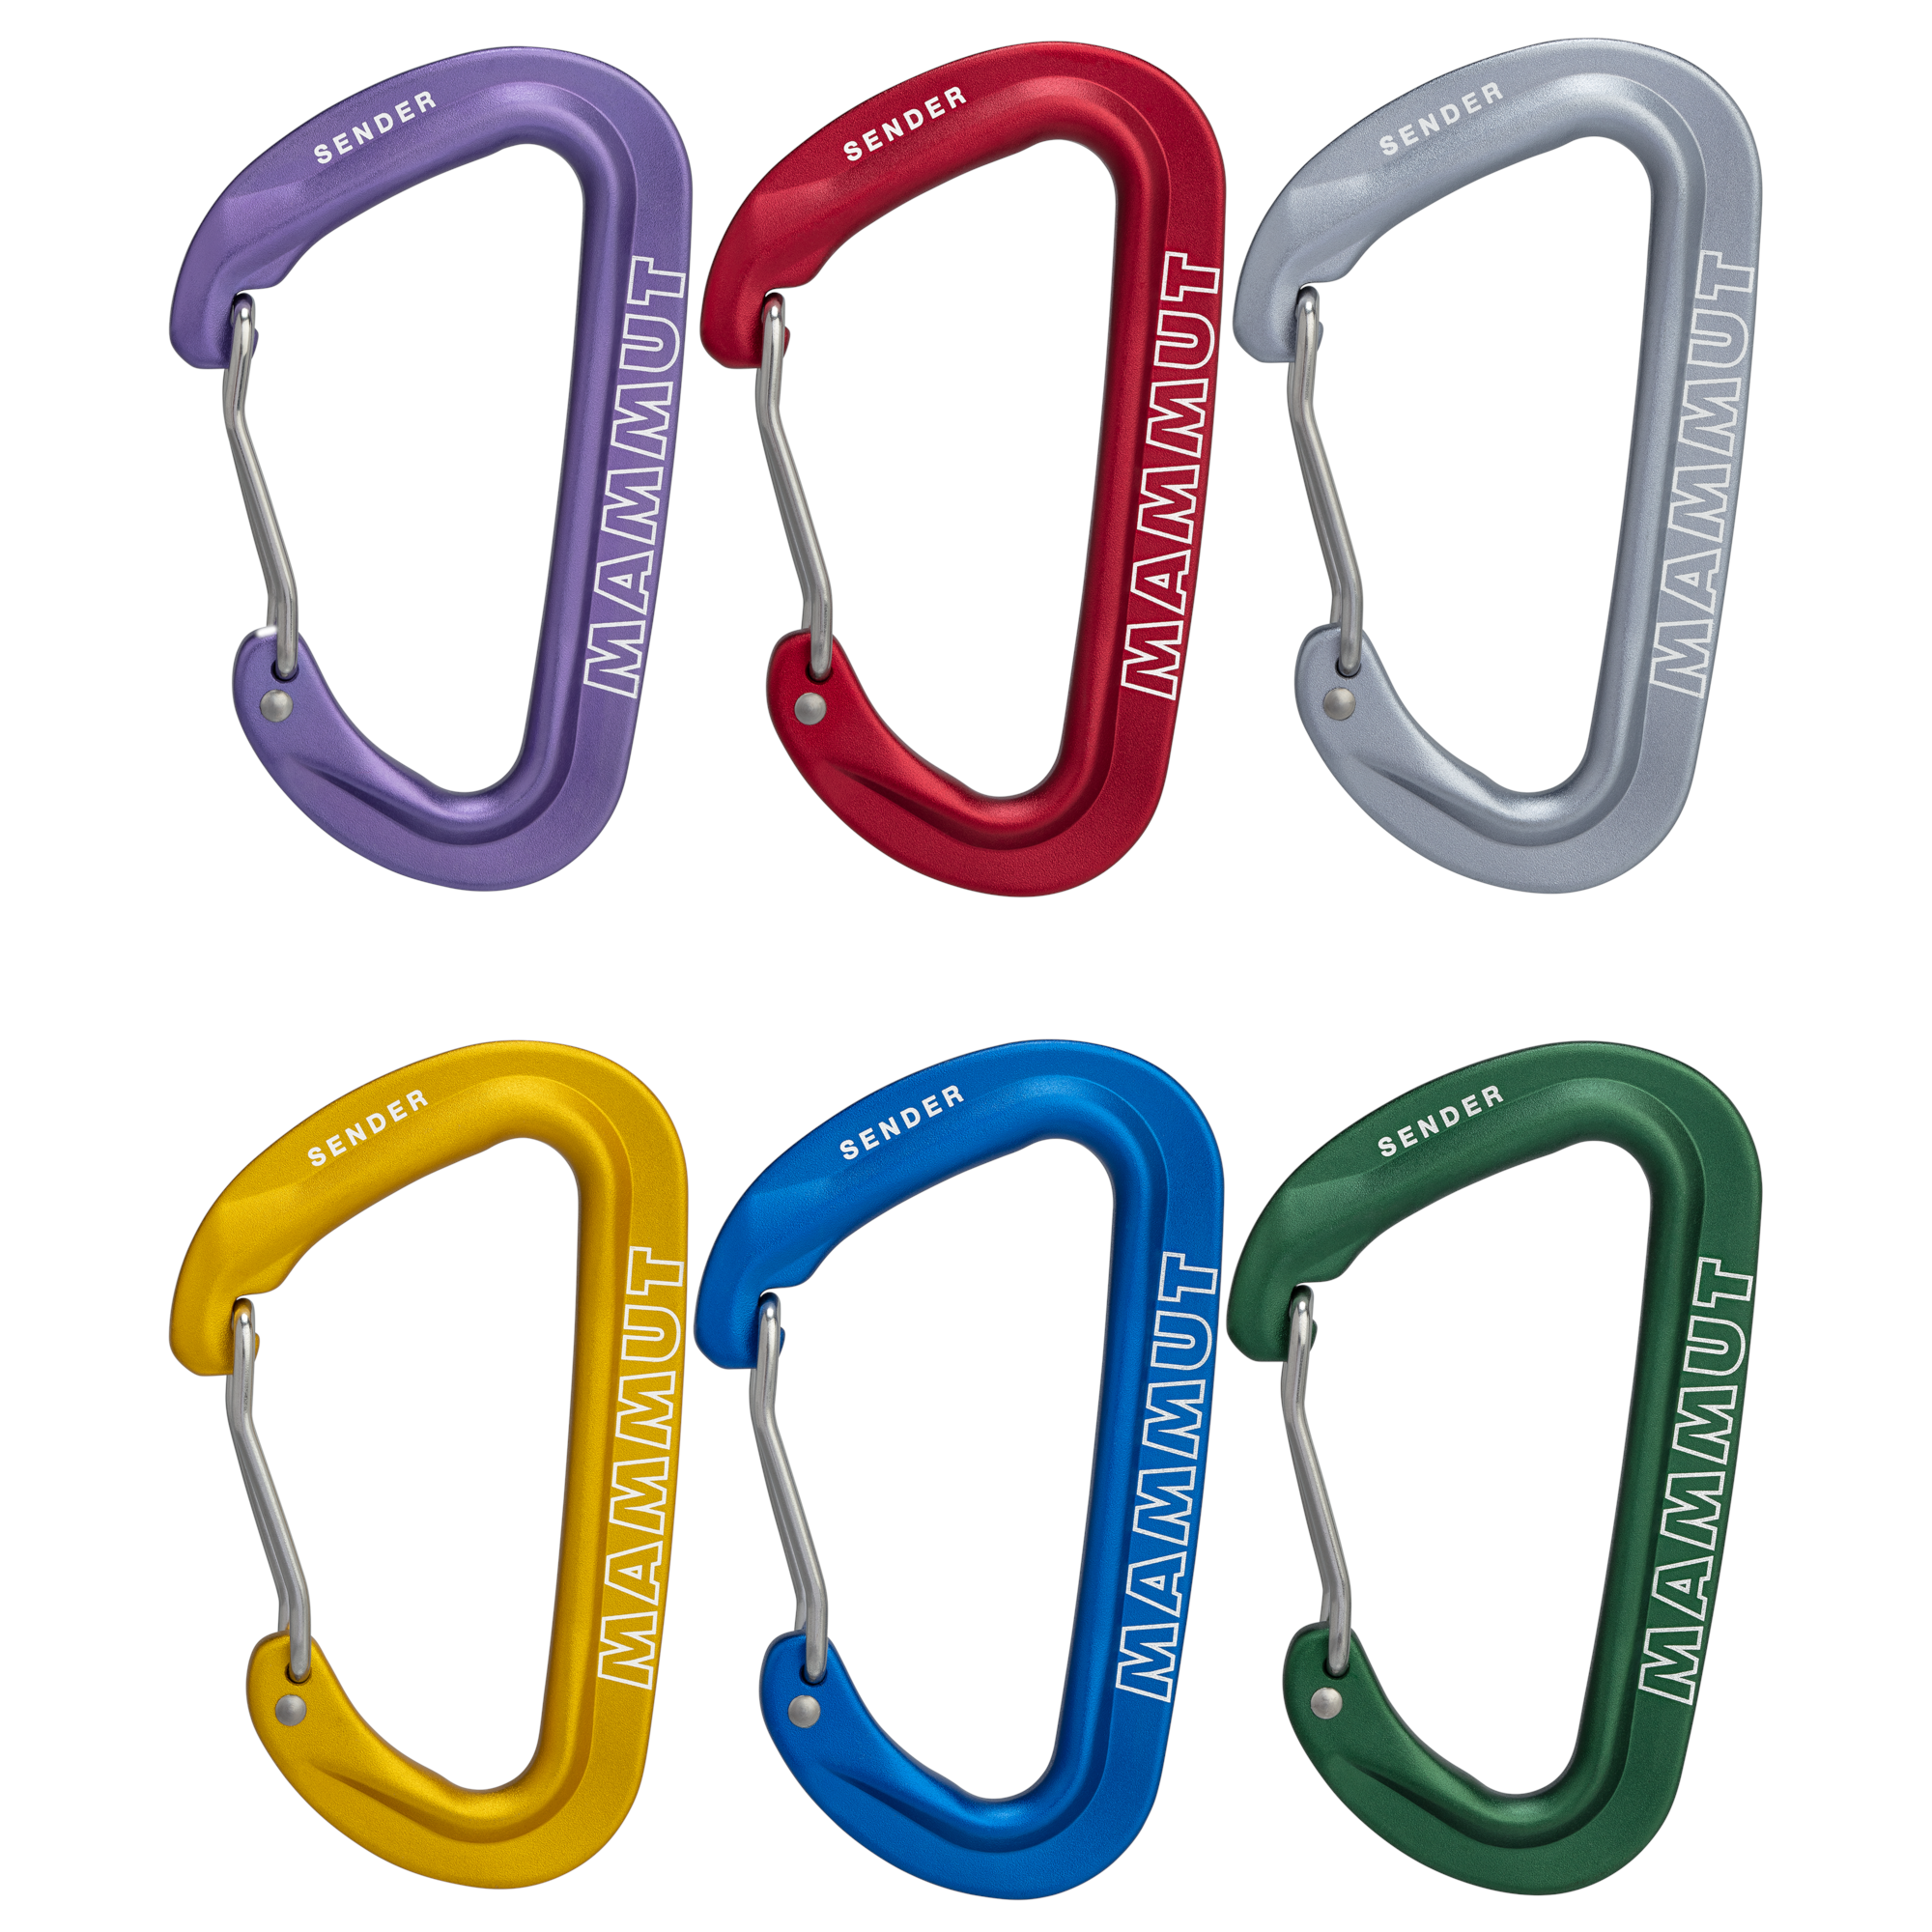 Mammut Sender Wire Rackpack , 6 carabiners in purple, red, silver, gold, blue, green